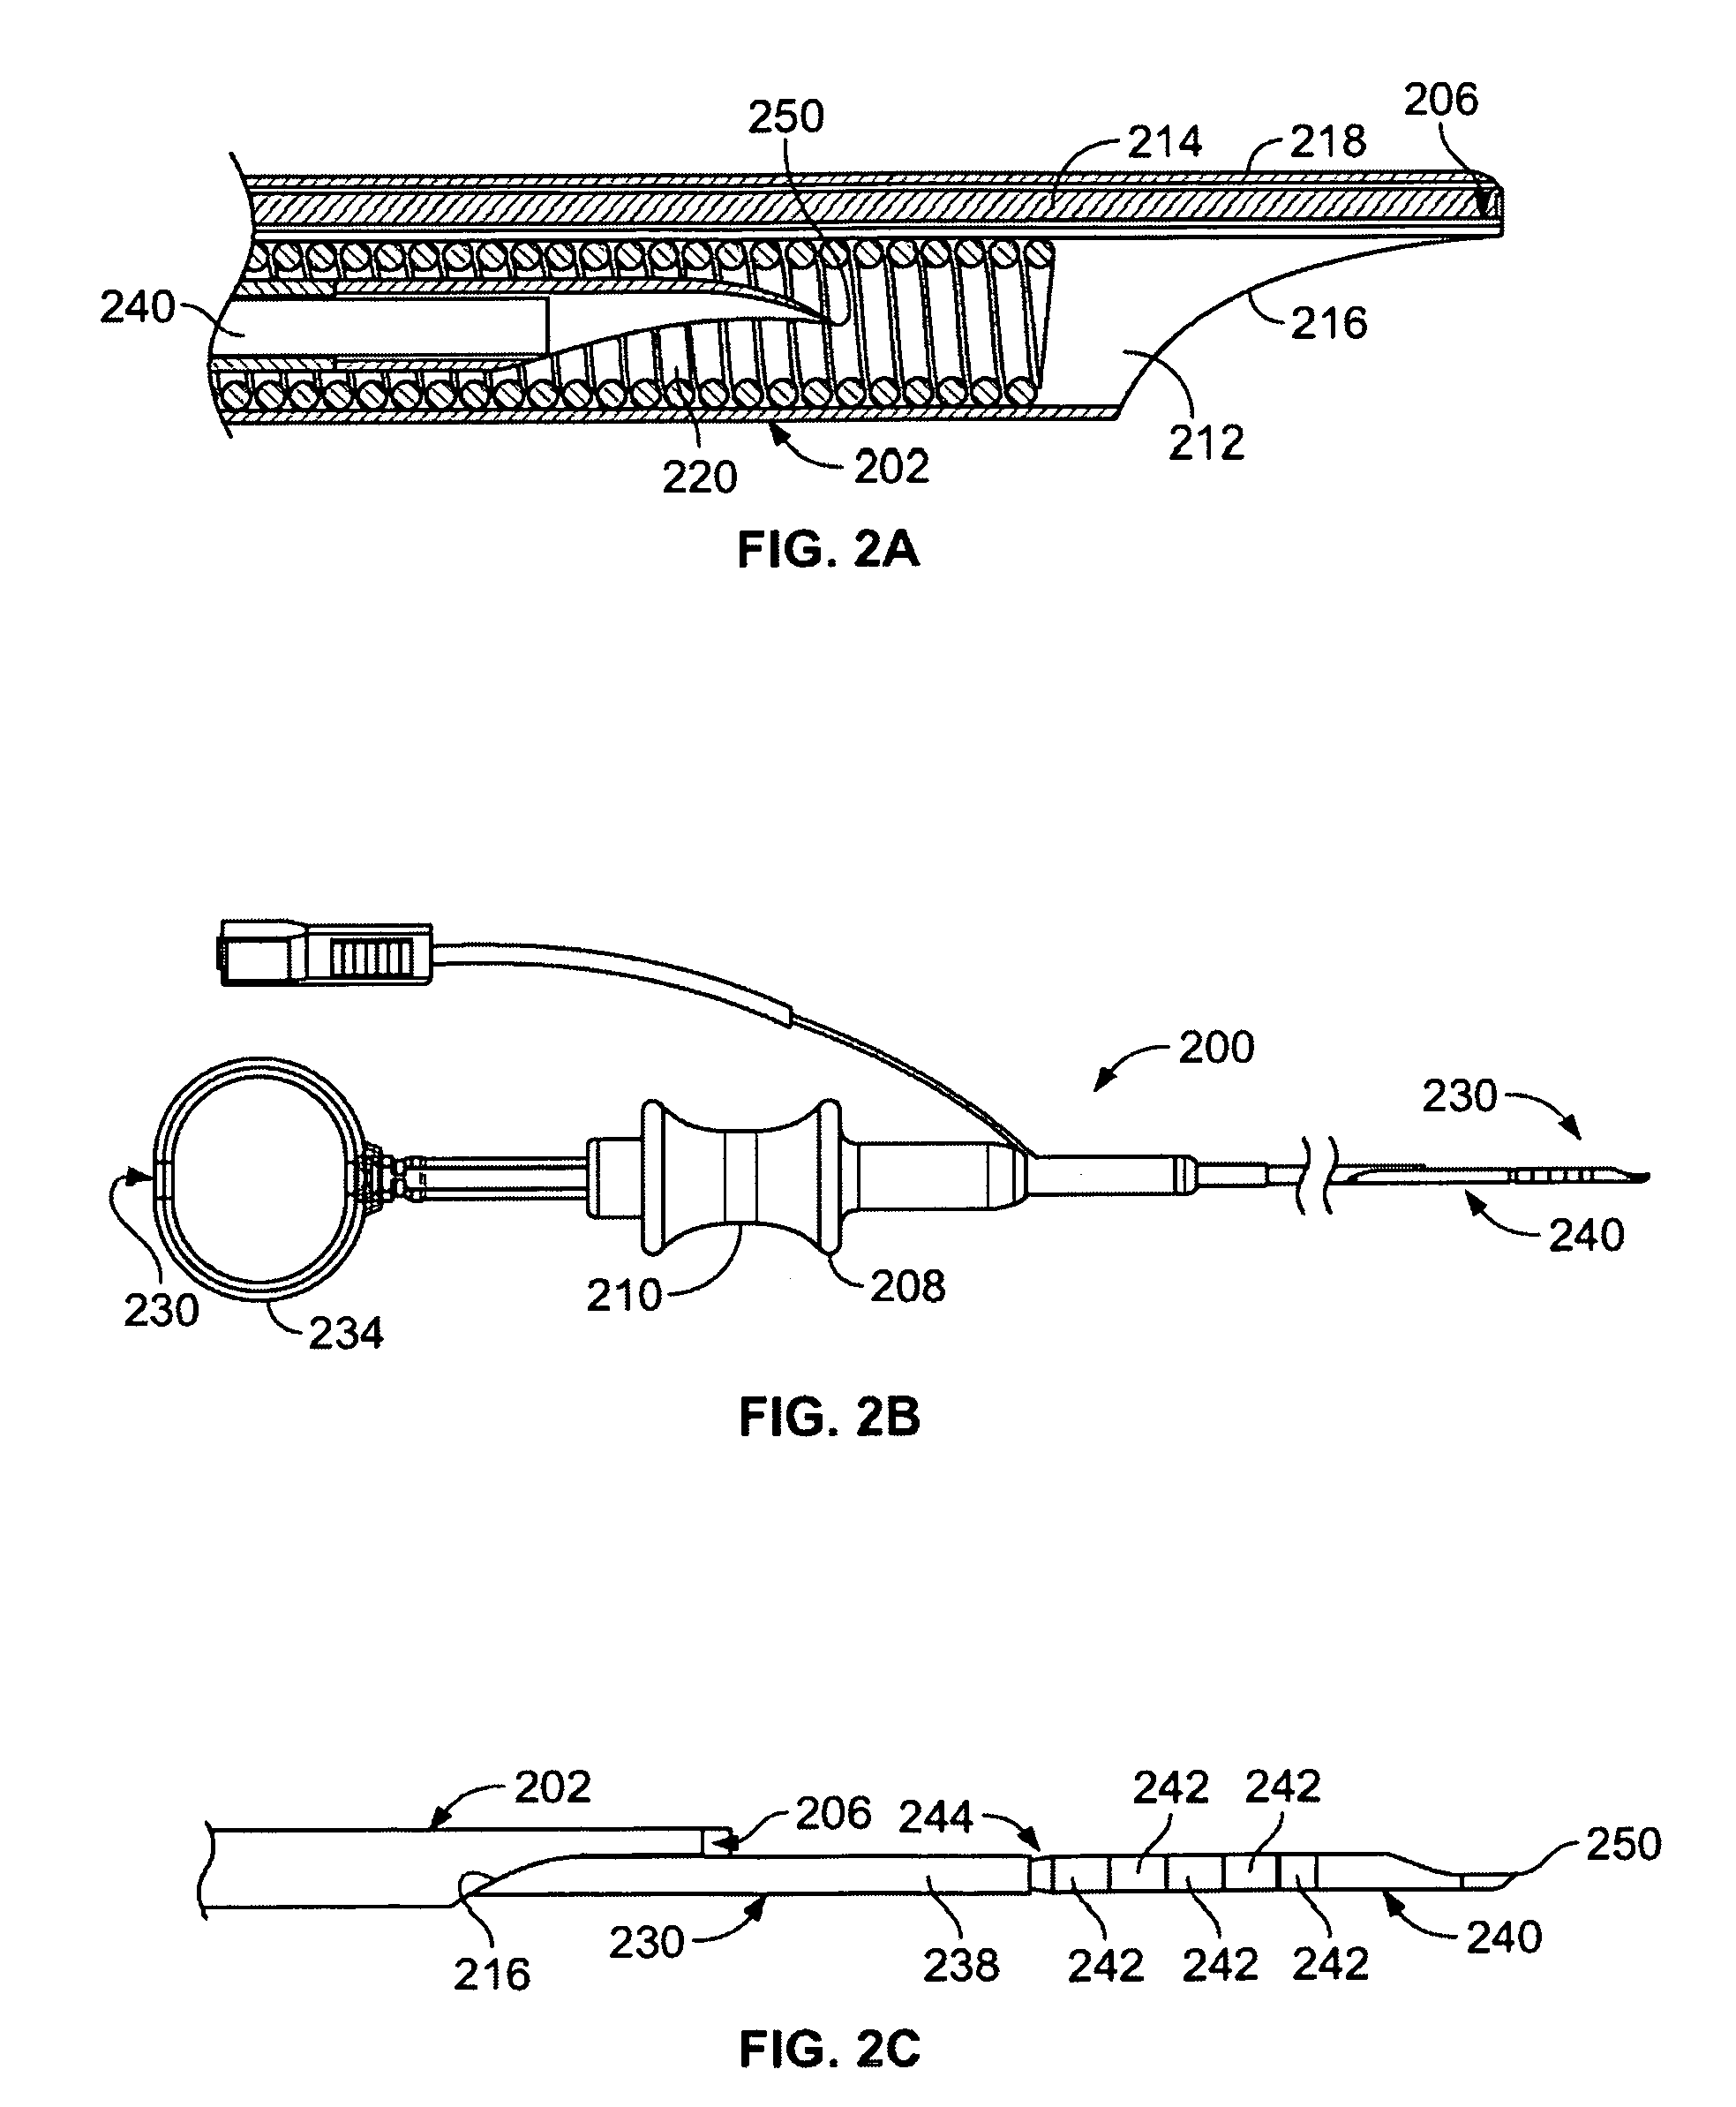 Puncture resistant catheter for sensing vessels and for creating passages in tissue